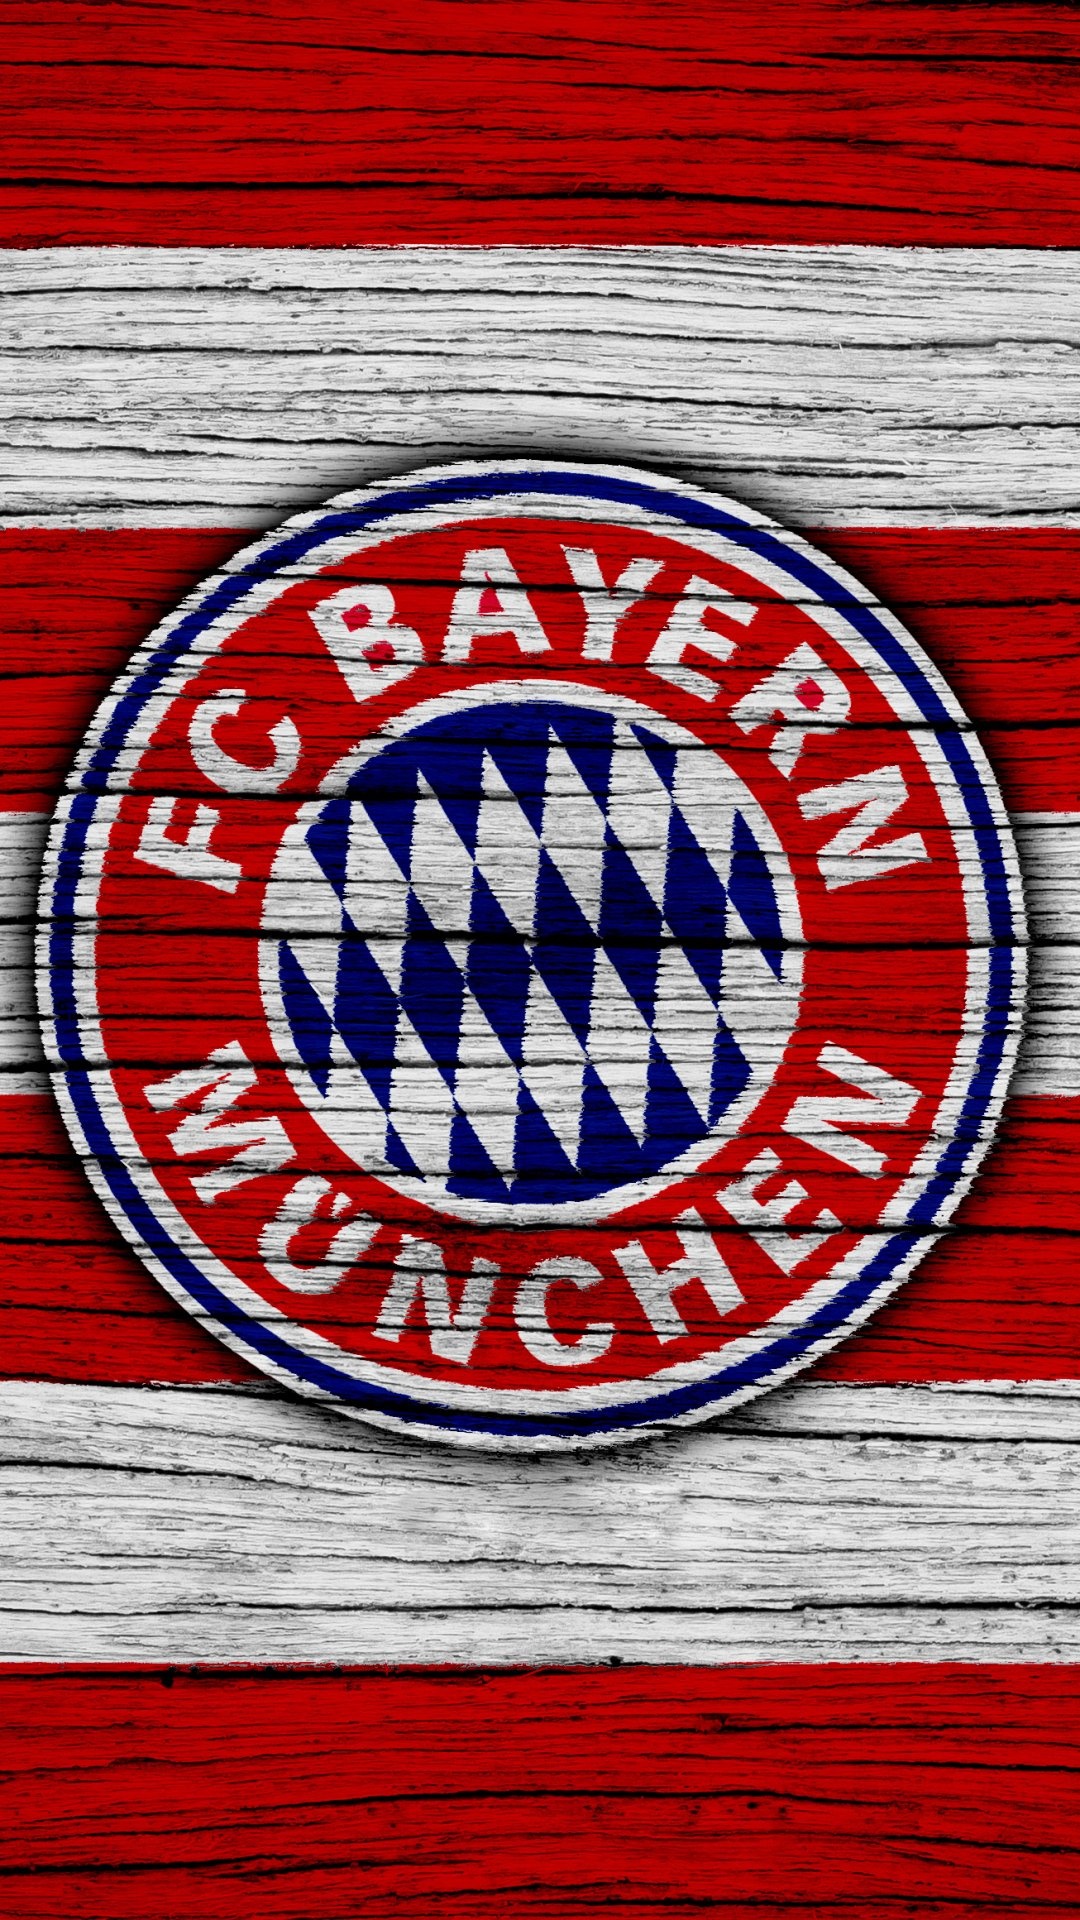 Bayern Munchen FC: Sports FC, won its first national championship in 1932. 1080x1920 Full HD Background.